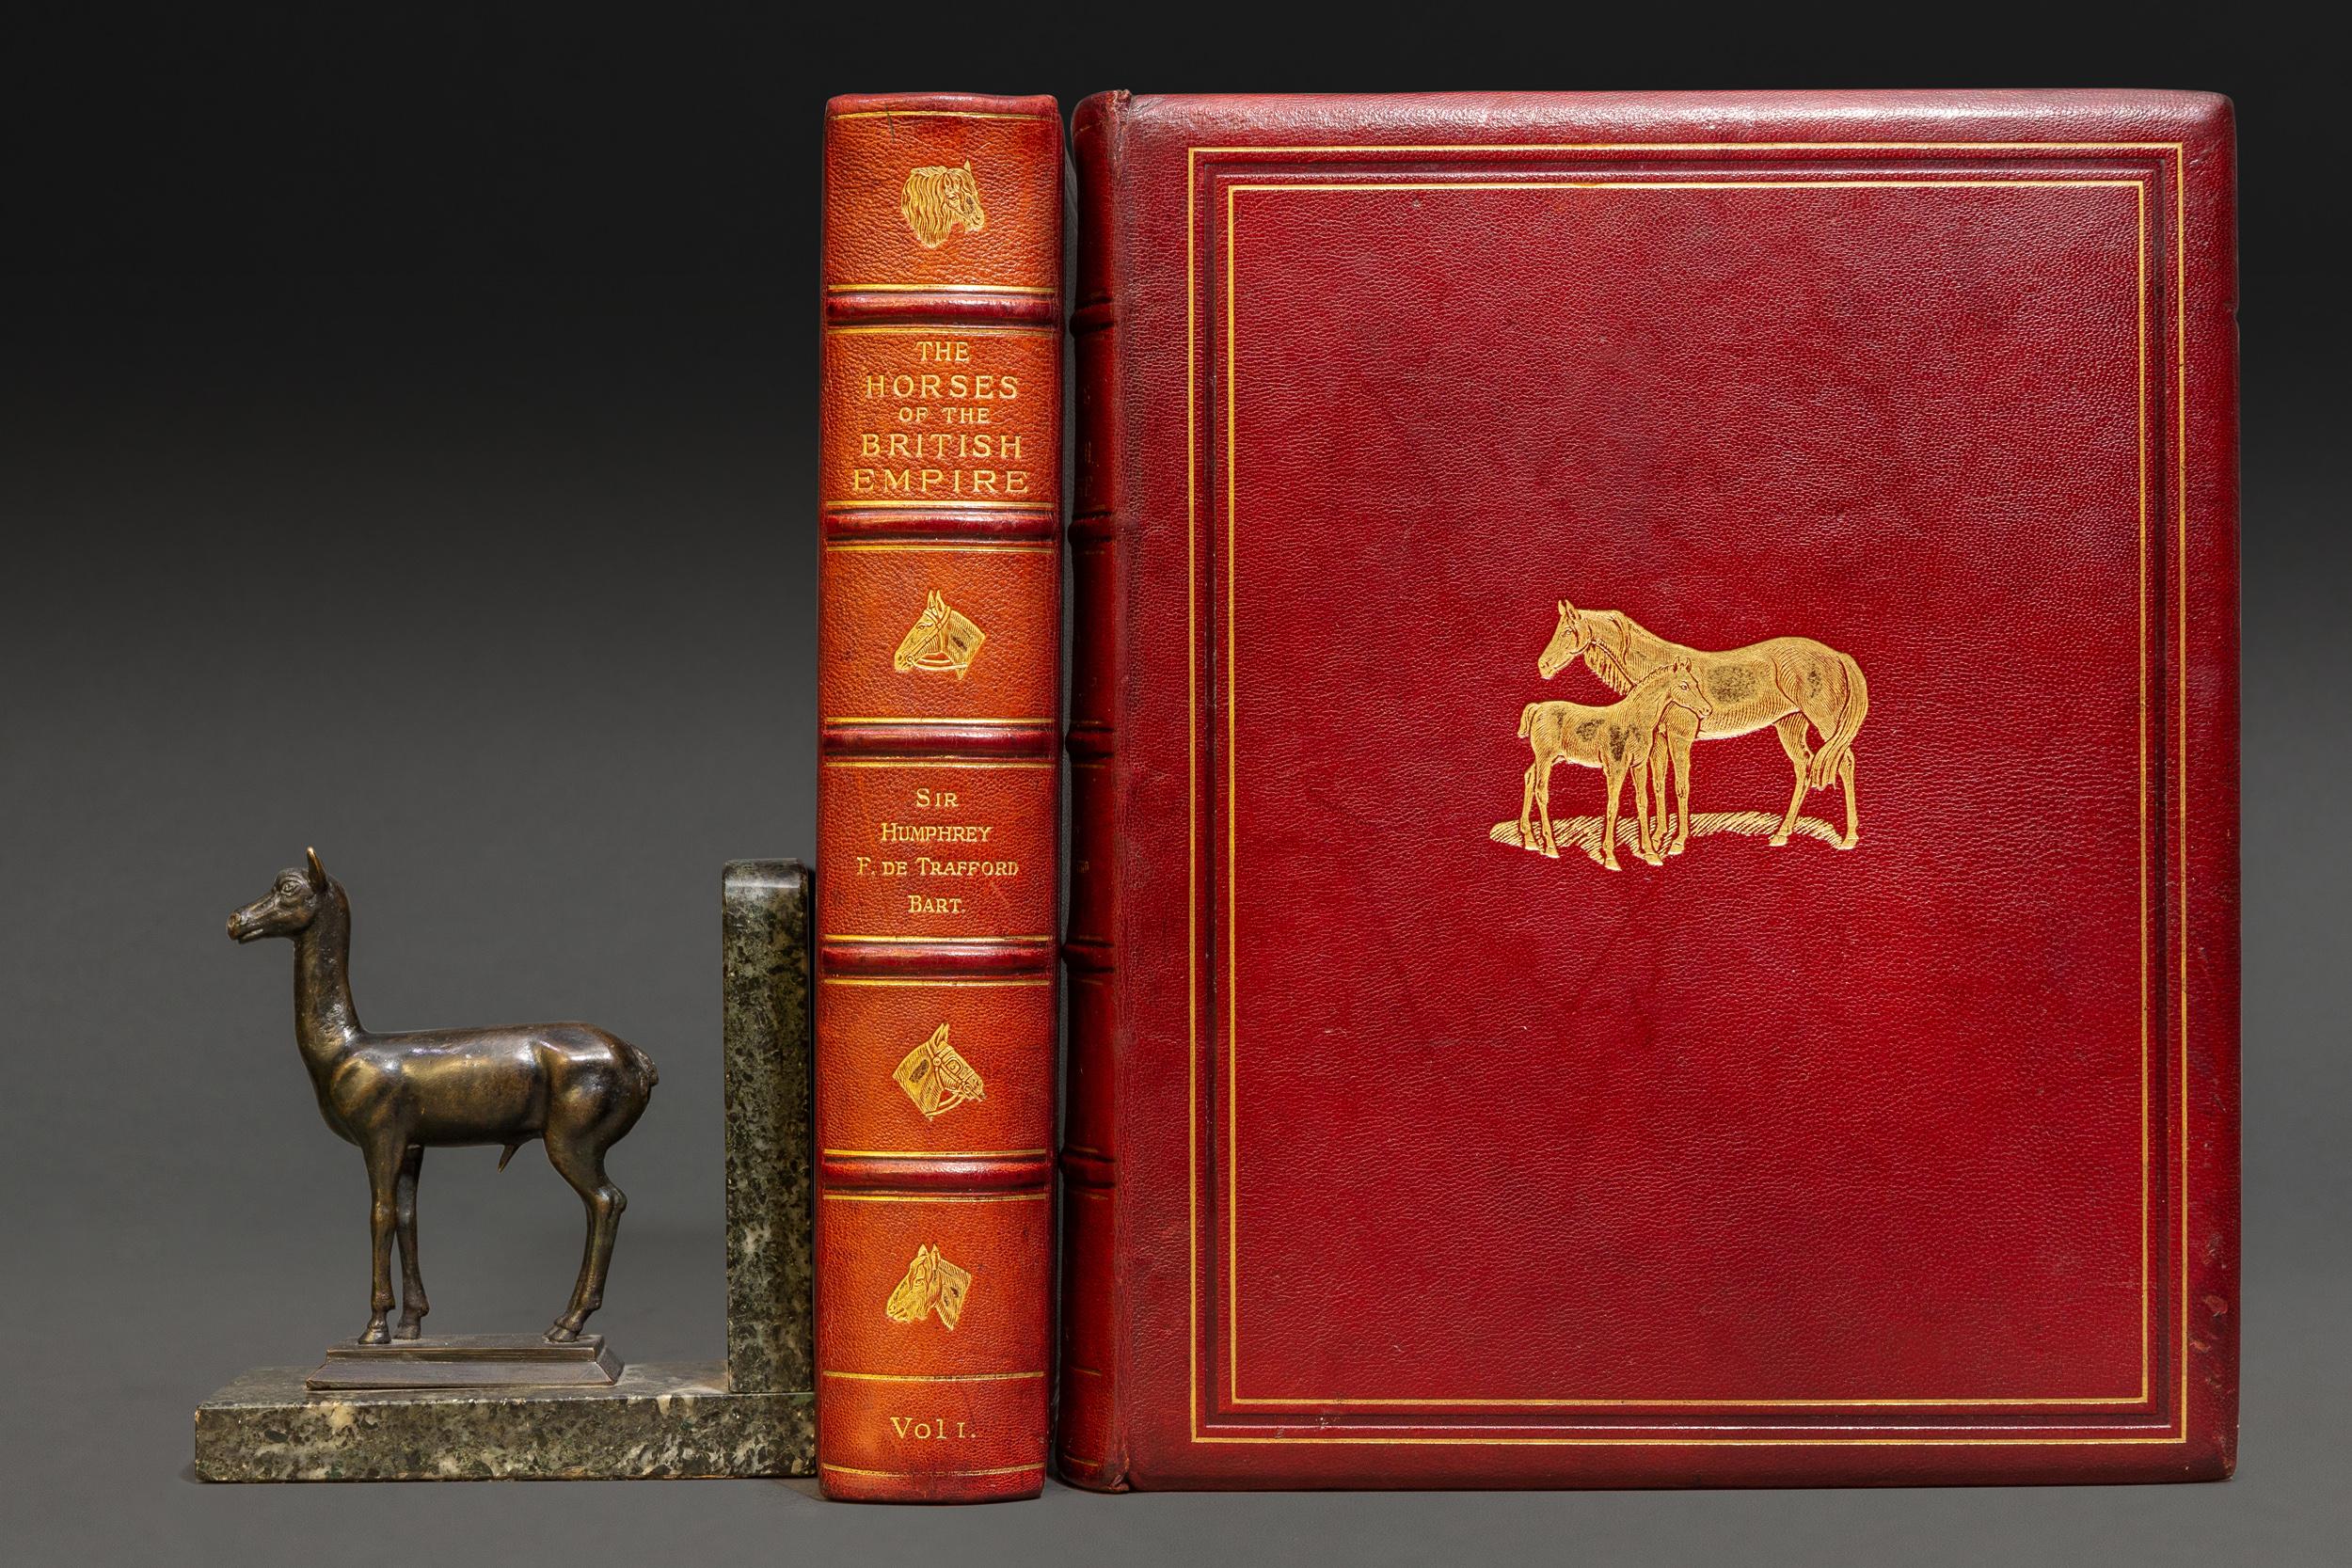 2 Volumes. Sir Humphrey F. de Trafford. The Horses of the British Empire. With frontispiece. Bound in full red morocco. Gilt on spines and covers, raised bands, all edges gilt, marbled endpapers, inner dentelles, numerous illustrations. 
Published: